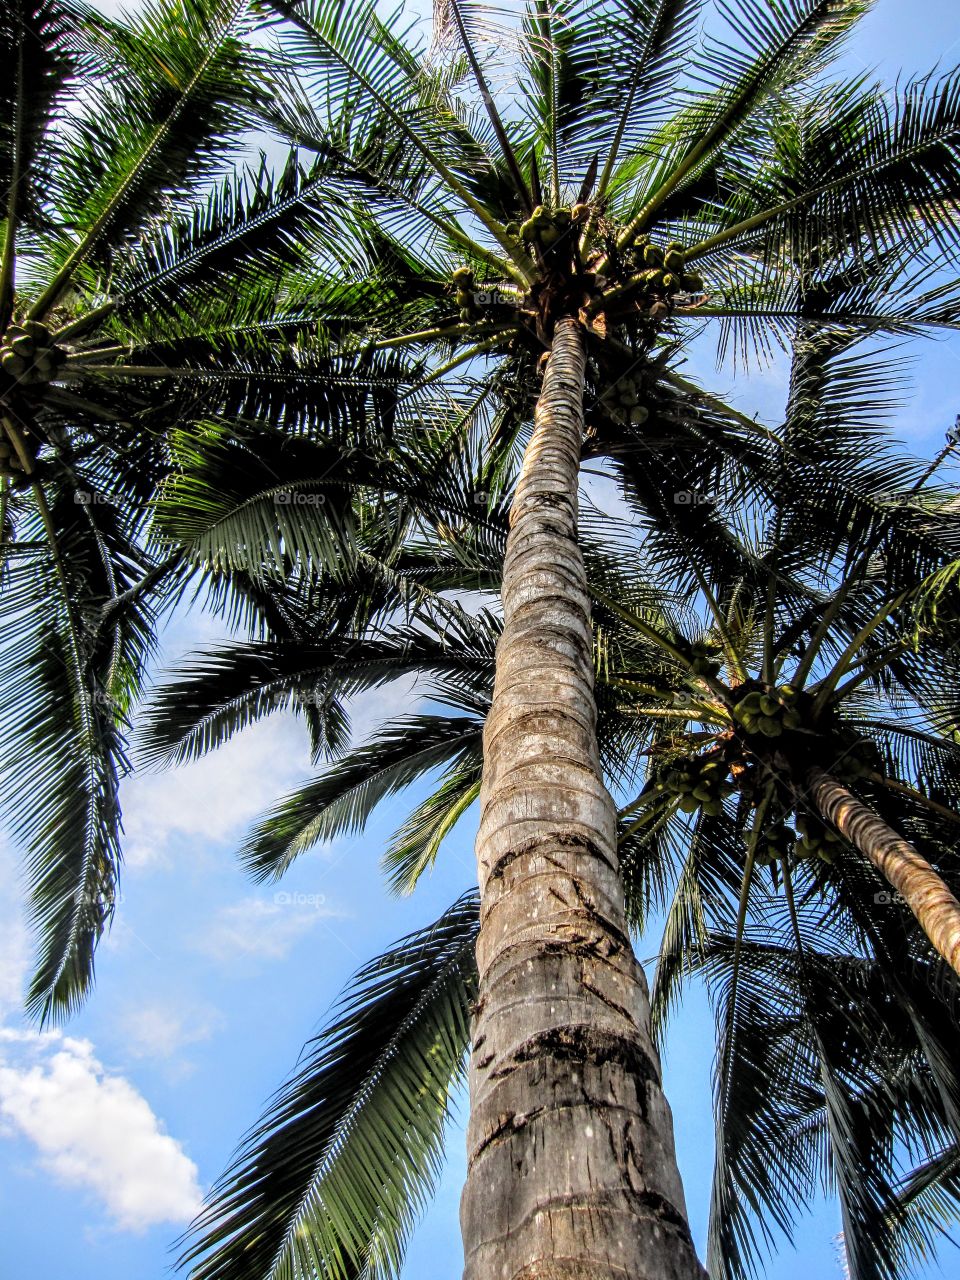 Healthy palm tree in a tropical climate near the ocean. 